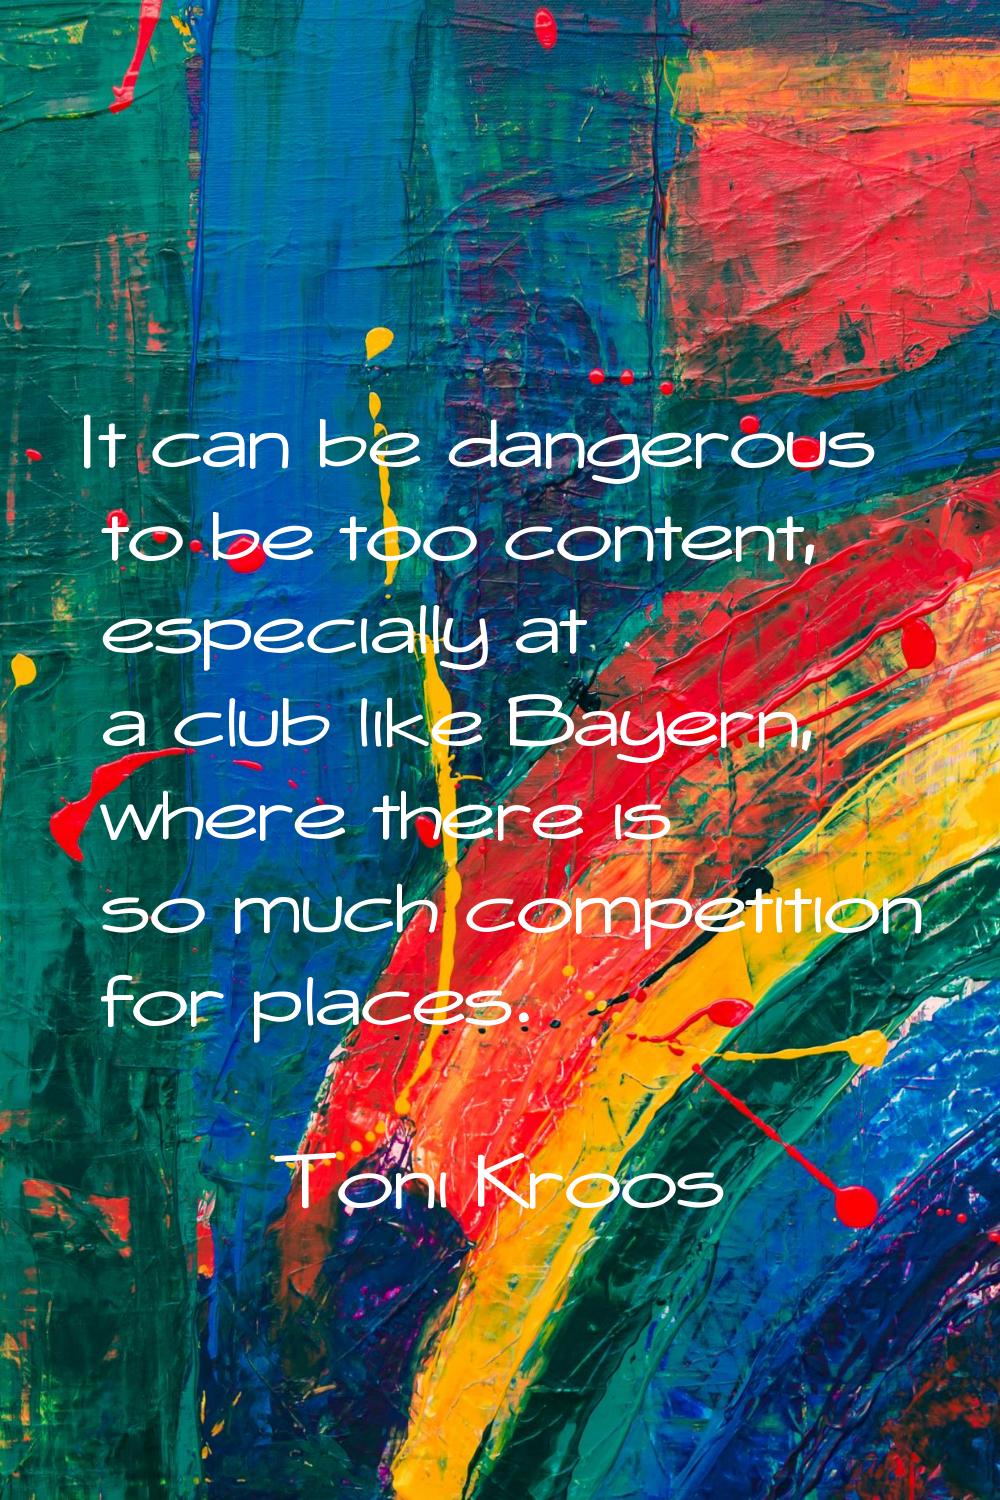 It can be dangerous to be too content, especially at a club like Bayern, where there is so much com